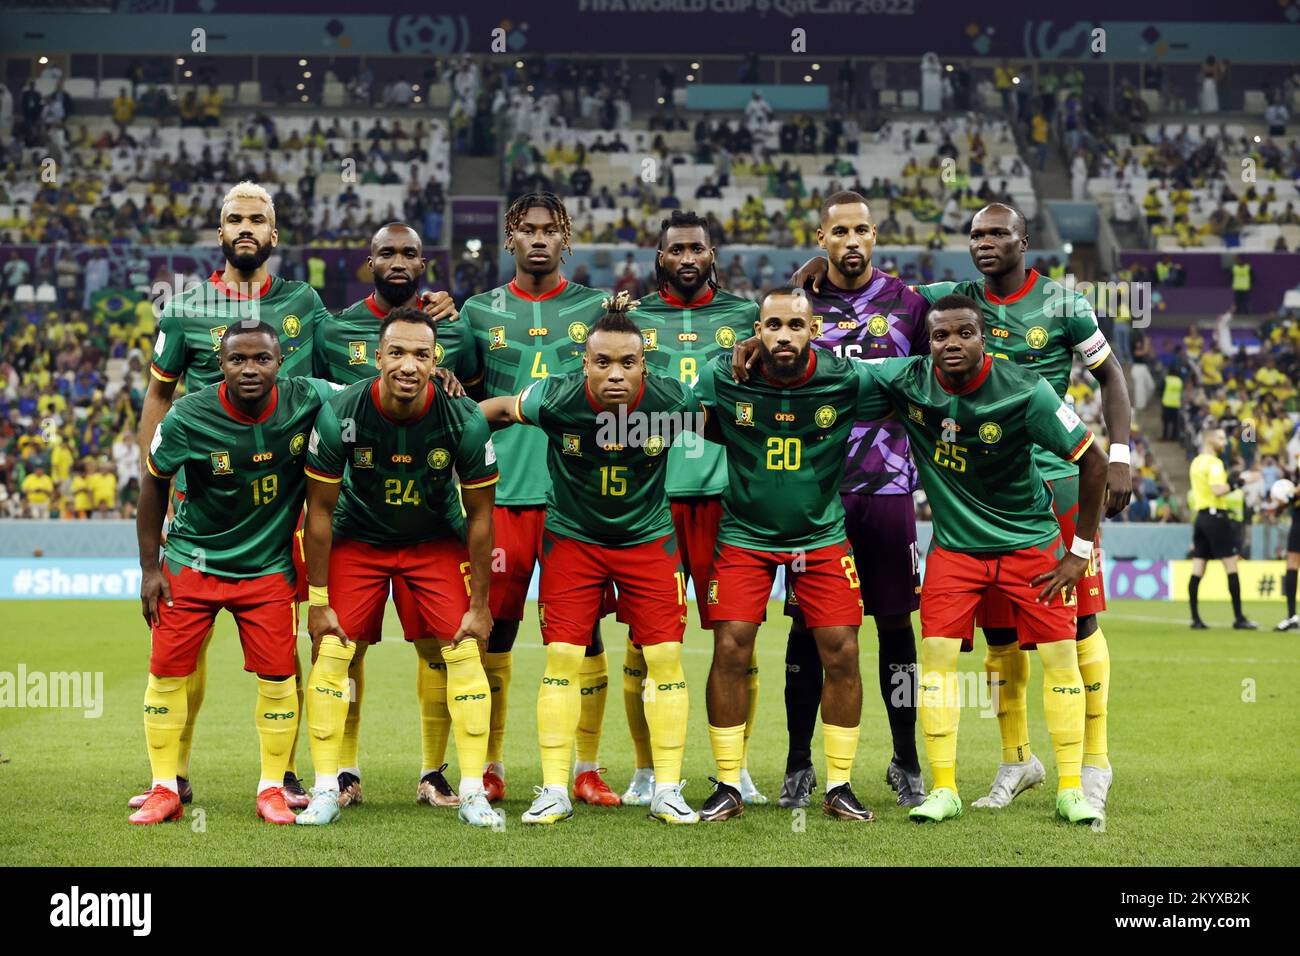 Qatar. 02nd Dec, 2022. LUSAIL CITY - Back row (lr) Eric Maxim Choupo-Moting of Cameroon, Nicolas Ngamaleu of Cameroon, Andre-Frank Zambo Anguissa of Cameroon, Cameroon keeper Devis Epassy, Vincent,Christopher Wooh of Cameroon. Front row (l-r) Collins Fai of Cameroon, Enzo Ebosse of Cameroon, Pierre Kunde of Cameroon, Bryan Mbeumo of Cameroon, Nouhou Tolo of Cameroon, Vincent Aboubakar of Cameroon during the FIFA World Cup Qatar 2022 group G match between Cameroon and Brazil in the Lusail Stadium on December 2, 2022 in Lusail City, Qatar. AP | Dutch Height | MAURICE OF STONE Credit: ANP/Alamy L Stock Photo